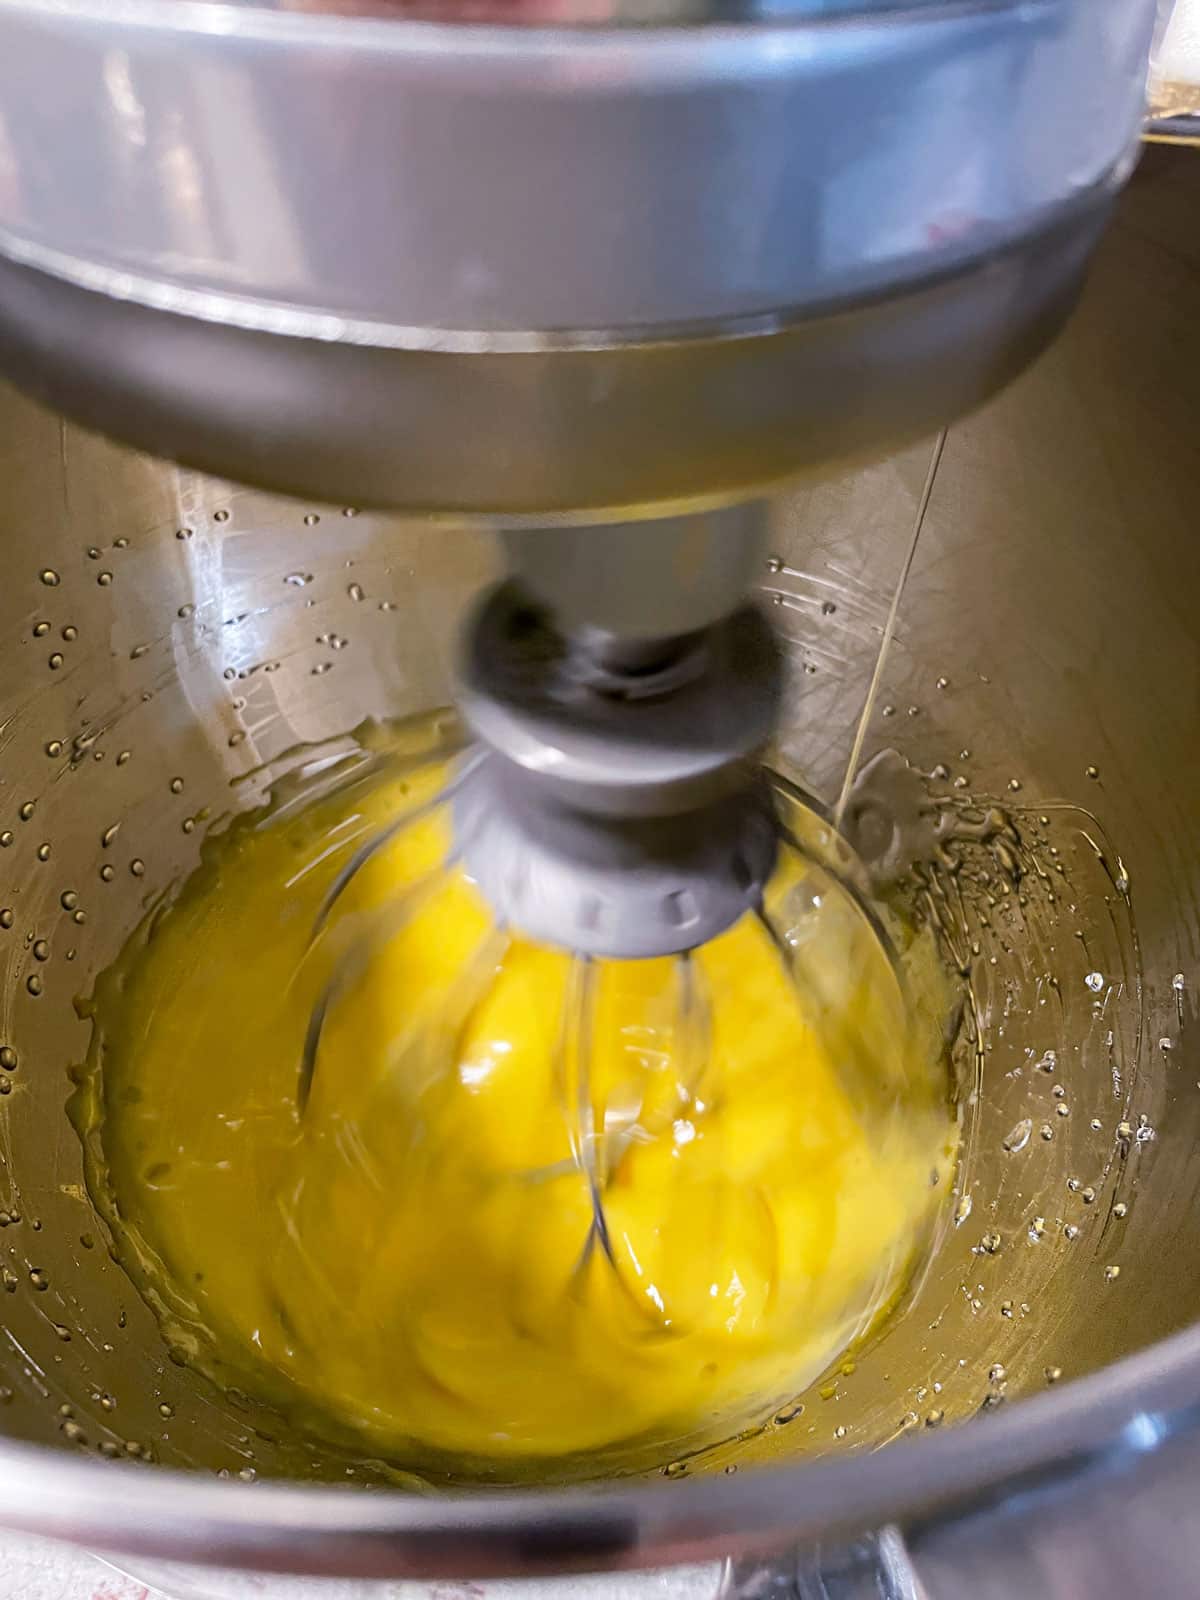 Process of pouring hot syrup down the side of a mixer bowl and beating into eggs.